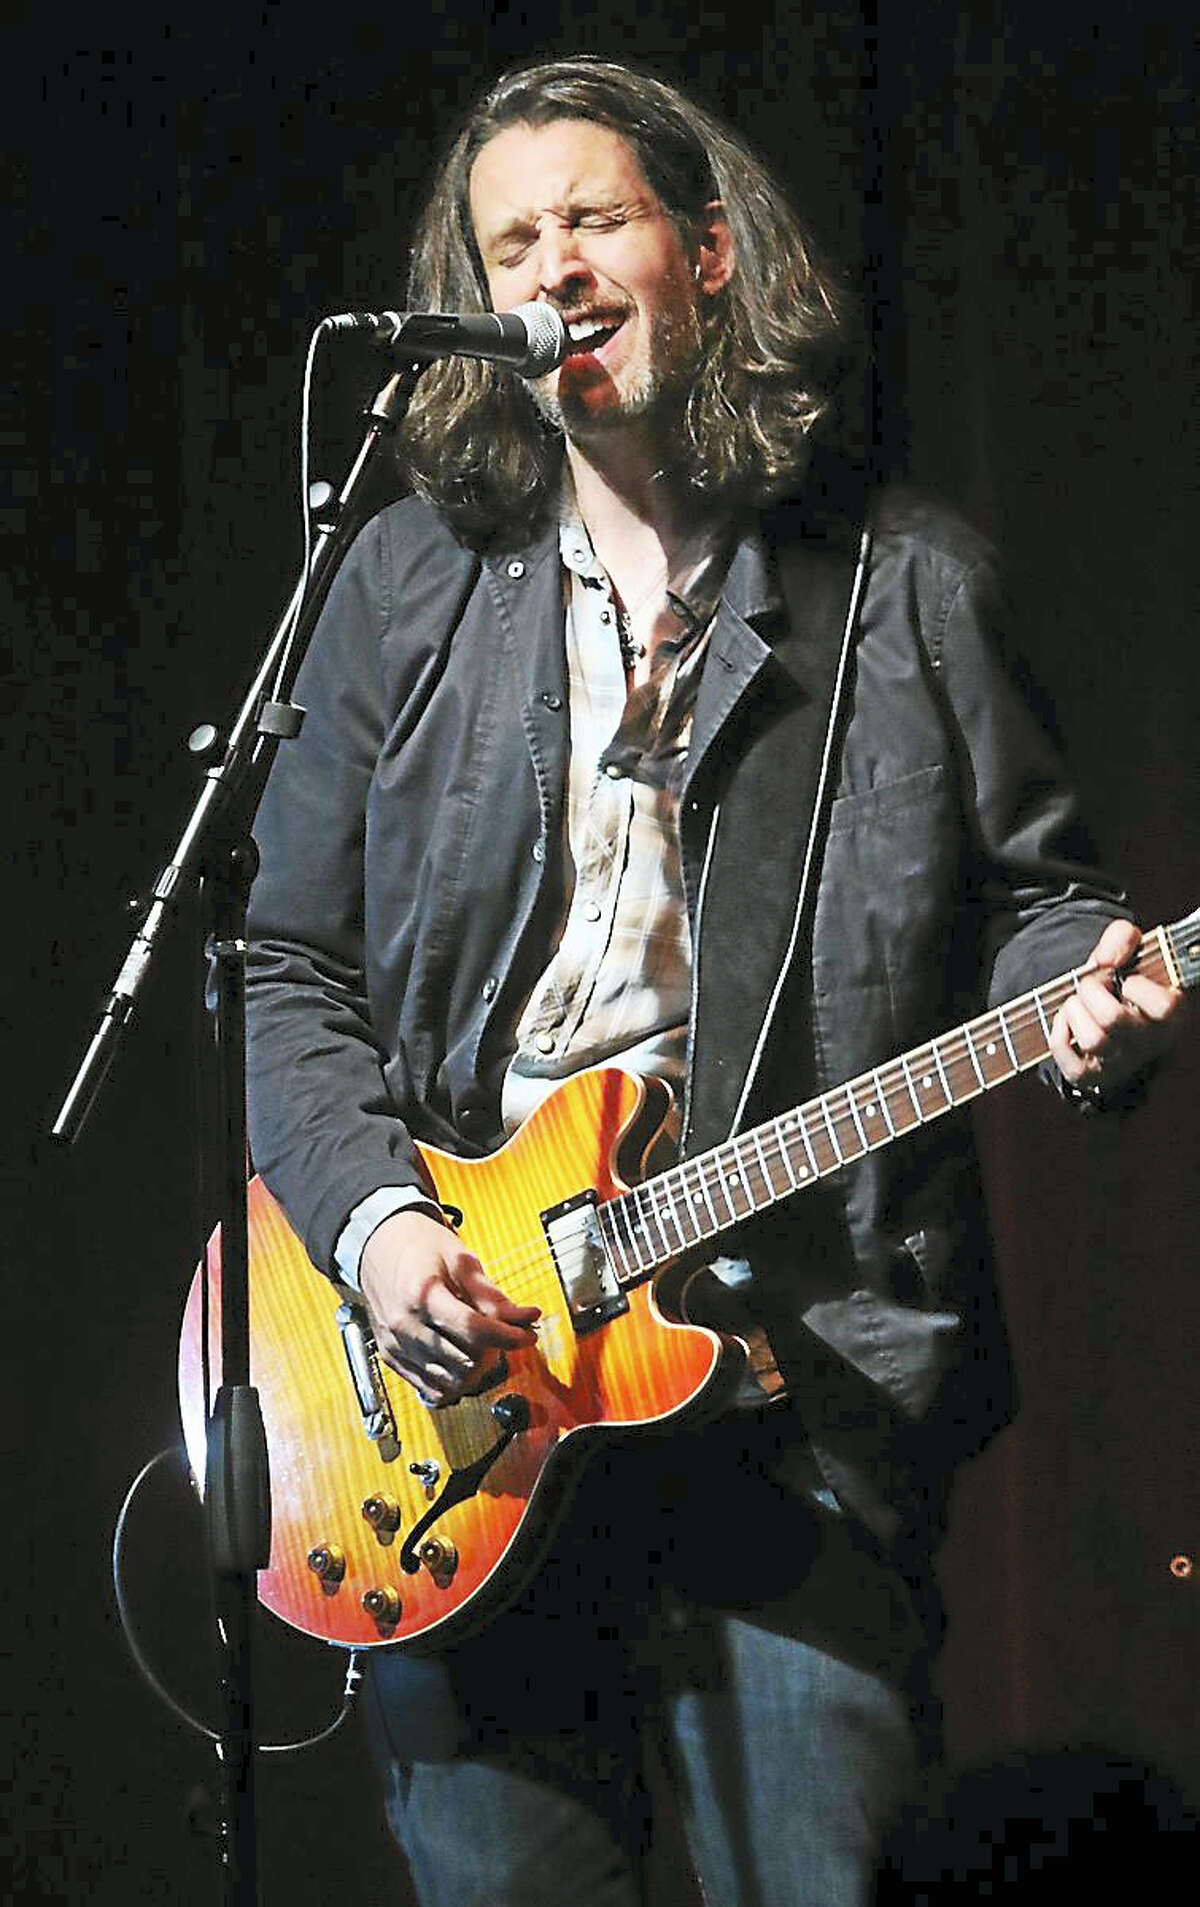 Photo by John AtashianGuitarist Scott Sharrard, widely known as the lead guitarist and musical director of the Gregg Allman Band, is shown performing on stage at Bridge Street Live in Collinsville on June 9. Scott Sharrard & the Brickyard Band entertained the crowd of fans with songs from their brand new self titled debut album. To learn more about this rising star,visit www.scottsharrard.com